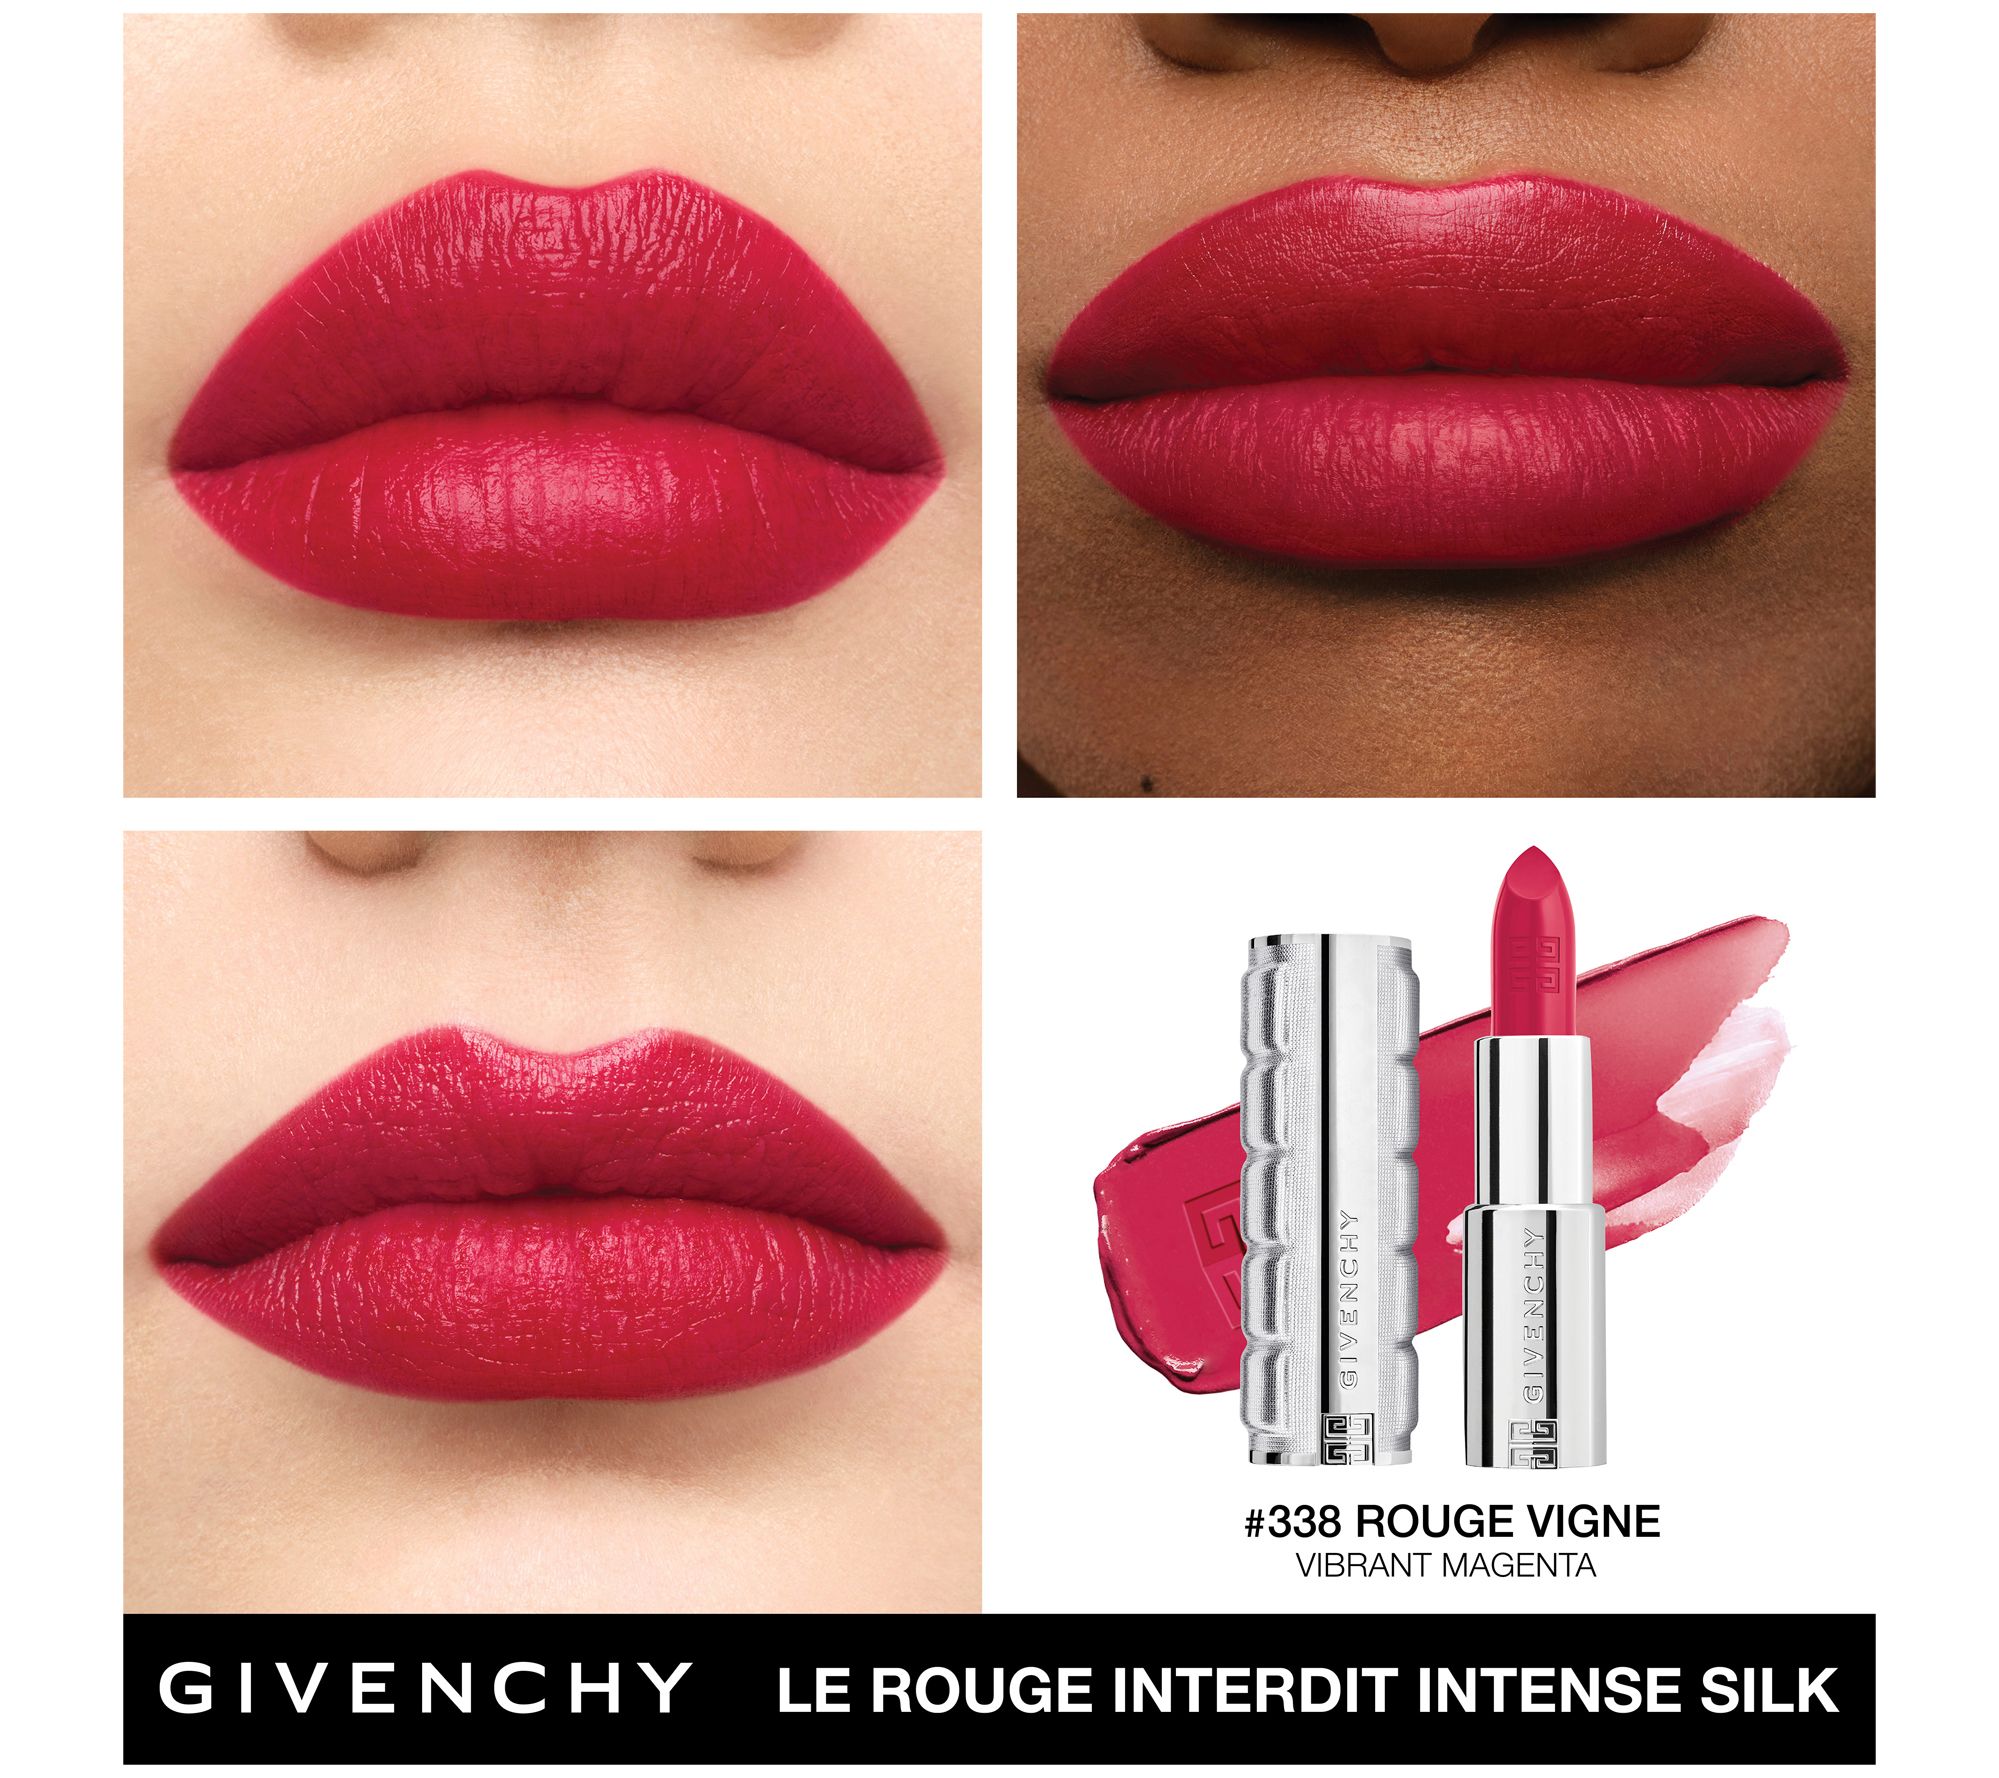 Givenchy Le Rogue Interdit Cool-tone Red Lipstick 